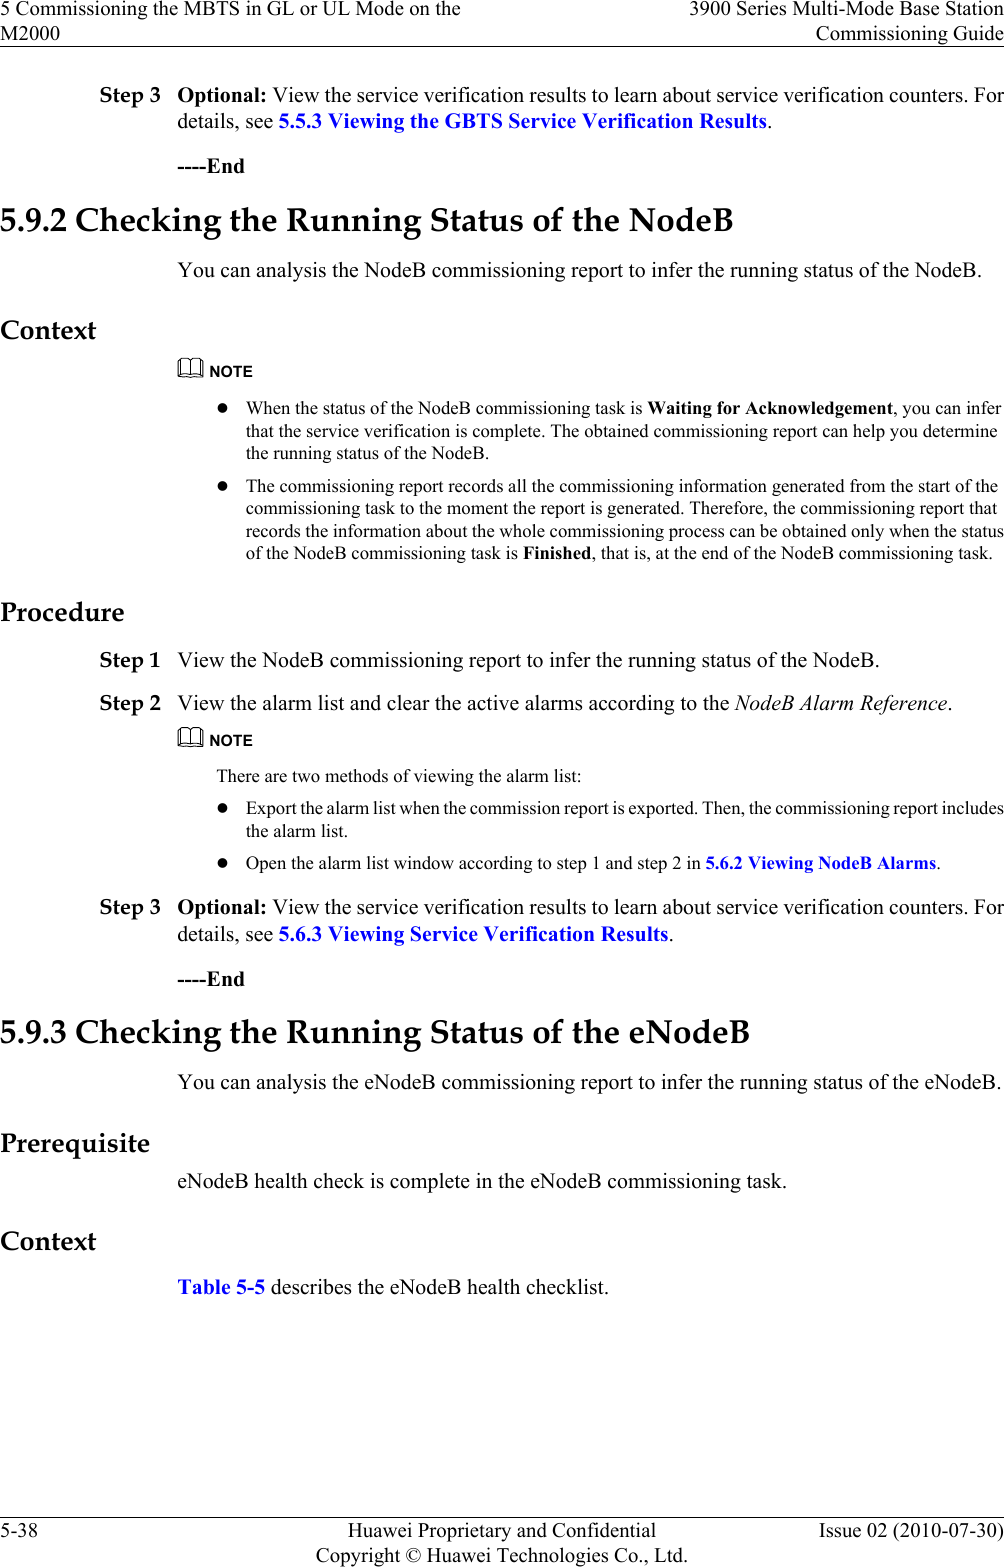 Step 3 Optional: View the service verification results to learn about service verification counters. Fordetails, see 5.5.3 Viewing the GBTS Service Verification Results.----End5.9.2 Checking the Running Status of the NodeBYou can analysis the NodeB commissioning report to infer the running status of the NodeB.ContextNOTElWhen the status of the NodeB commissioning task is Waiting for Acknowledgement, you can inferthat the service verification is complete. The obtained commissioning report can help you determinethe running status of the NodeB.lThe commissioning report records all the commissioning information generated from the start of thecommissioning task to the moment the report is generated. Therefore, the commissioning report thatrecords the information about the whole commissioning process can be obtained only when the statusof the NodeB commissioning task is Finished, that is, at the end of the NodeB commissioning task.ProcedureStep 1 View the NodeB commissioning report to infer the running status of the NodeB.Step 2 View the alarm list and clear the active alarms according to the NodeB Alarm Reference.NOTEThere are two methods of viewing the alarm list:lExport the alarm list when the commission report is exported. Then, the commissioning report includesthe alarm list.lOpen the alarm list window according to step 1 and step 2 in 5.6.2 Viewing NodeB Alarms.Step 3 Optional: View the service verification results to learn about service verification counters. Fordetails, see 5.6.3 Viewing Service Verification Results.----End5.9.3 Checking the Running Status of the eNodeBYou can analysis the eNodeB commissioning report to infer the running status of the eNodeB.PrerequisiteeNodeB health check is complete in the eNodeB commissioning task.ContextTable 5-5 describes the eNodeB health checklist.5 Commissioning the MBTS in GL or UL Mode on theM20003900 Series Multi-Mode Base StationCommissioning Guide5-38 Huawei Proprietary and ConfidentialCopyright © Huawei Technologies Co., Ltd.Issue 02 (2010-07-30)